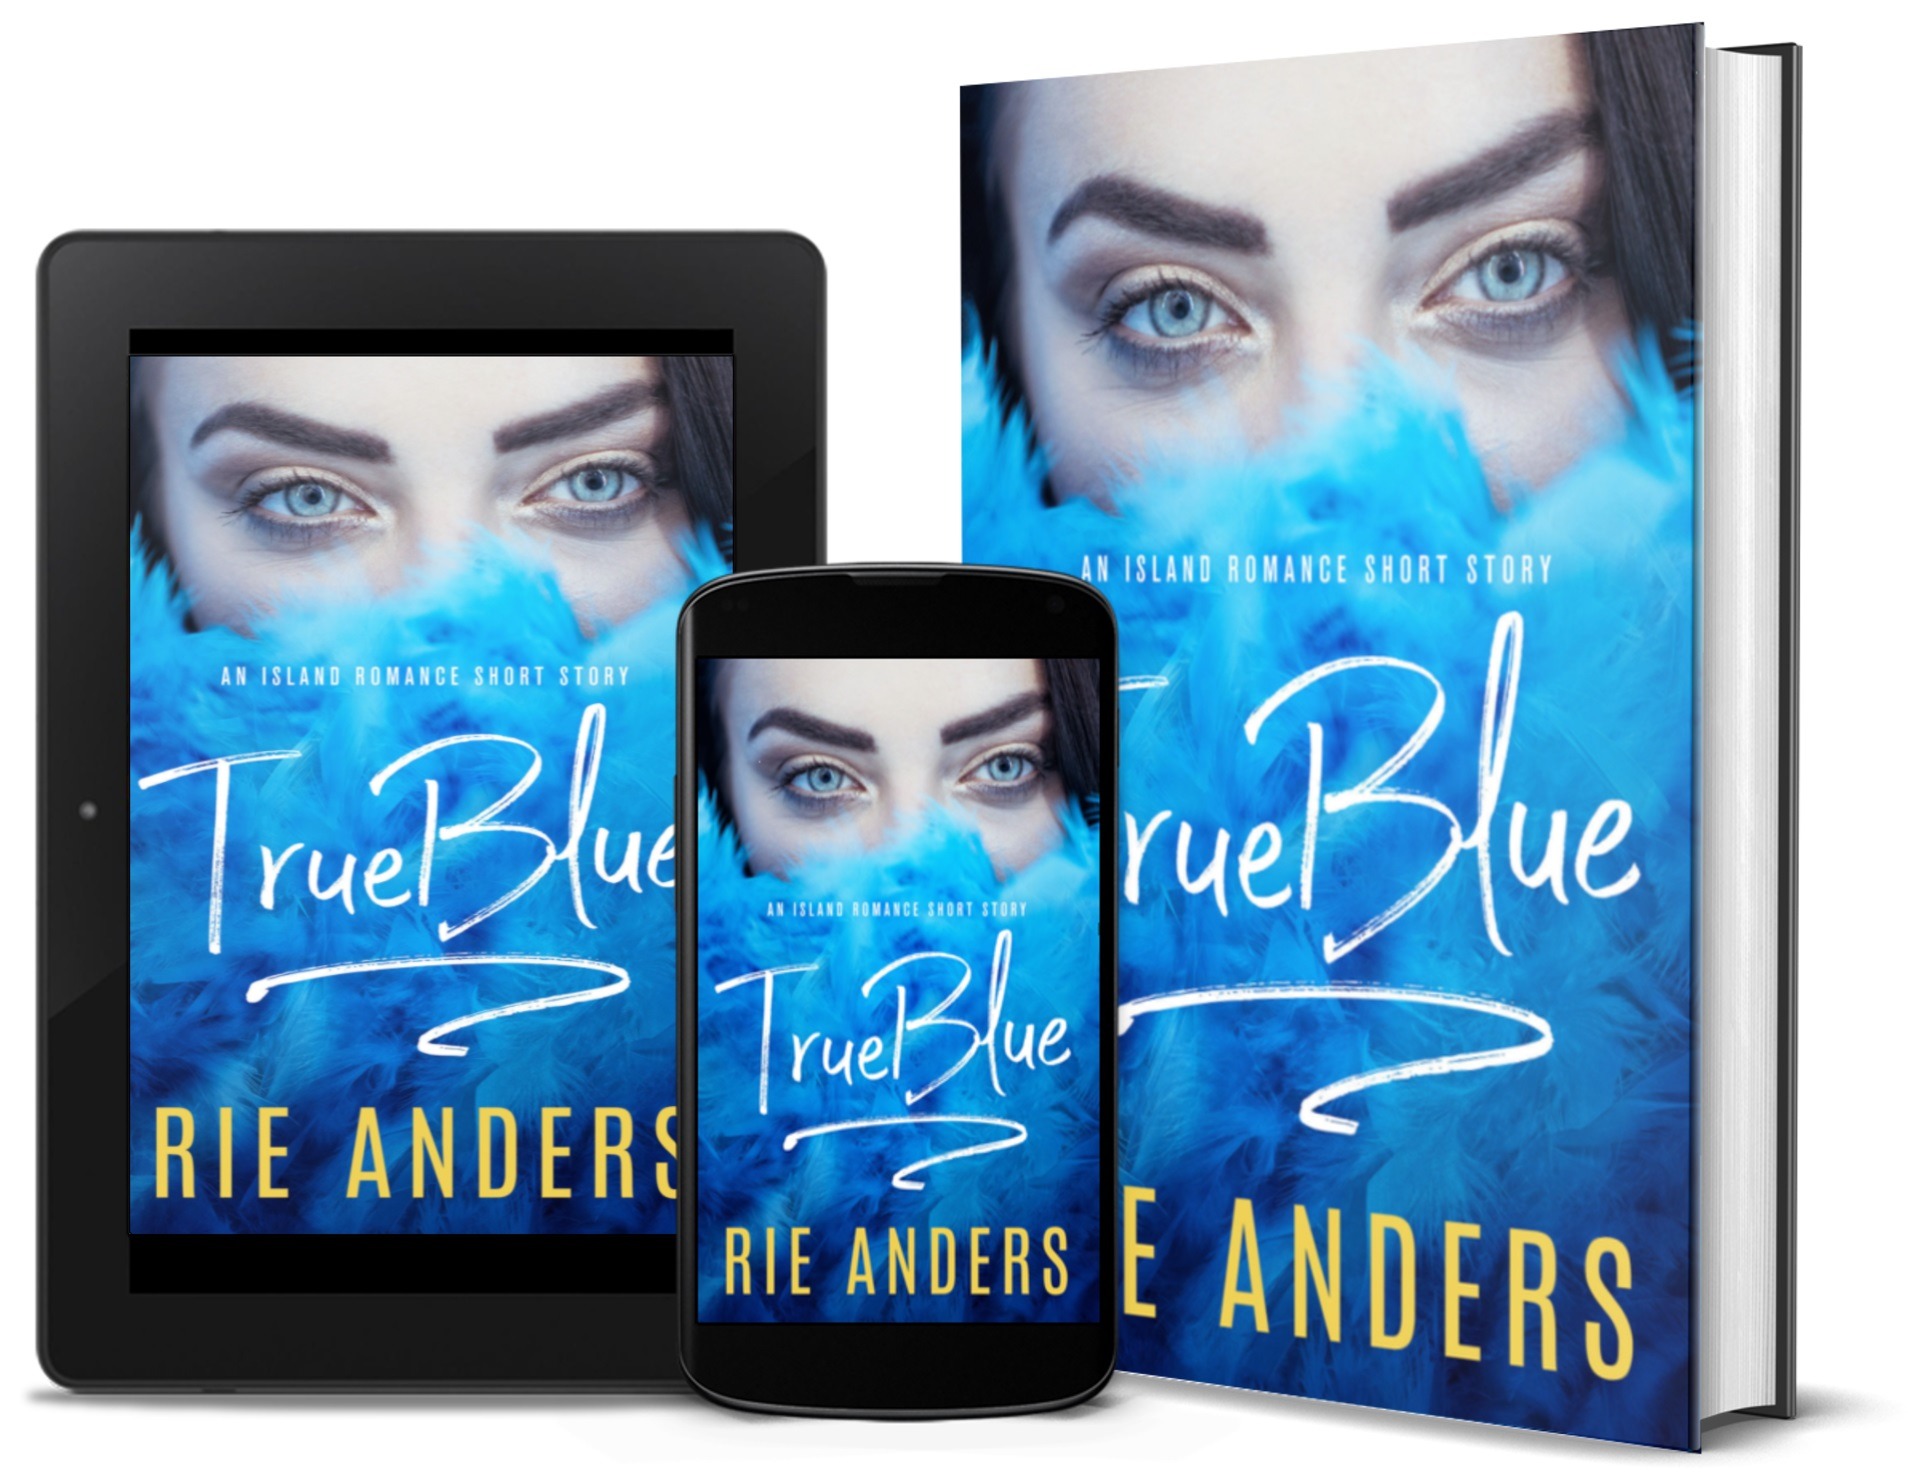 True Blue by Rie Anders. Polished by book editor Ashleigh Bonner